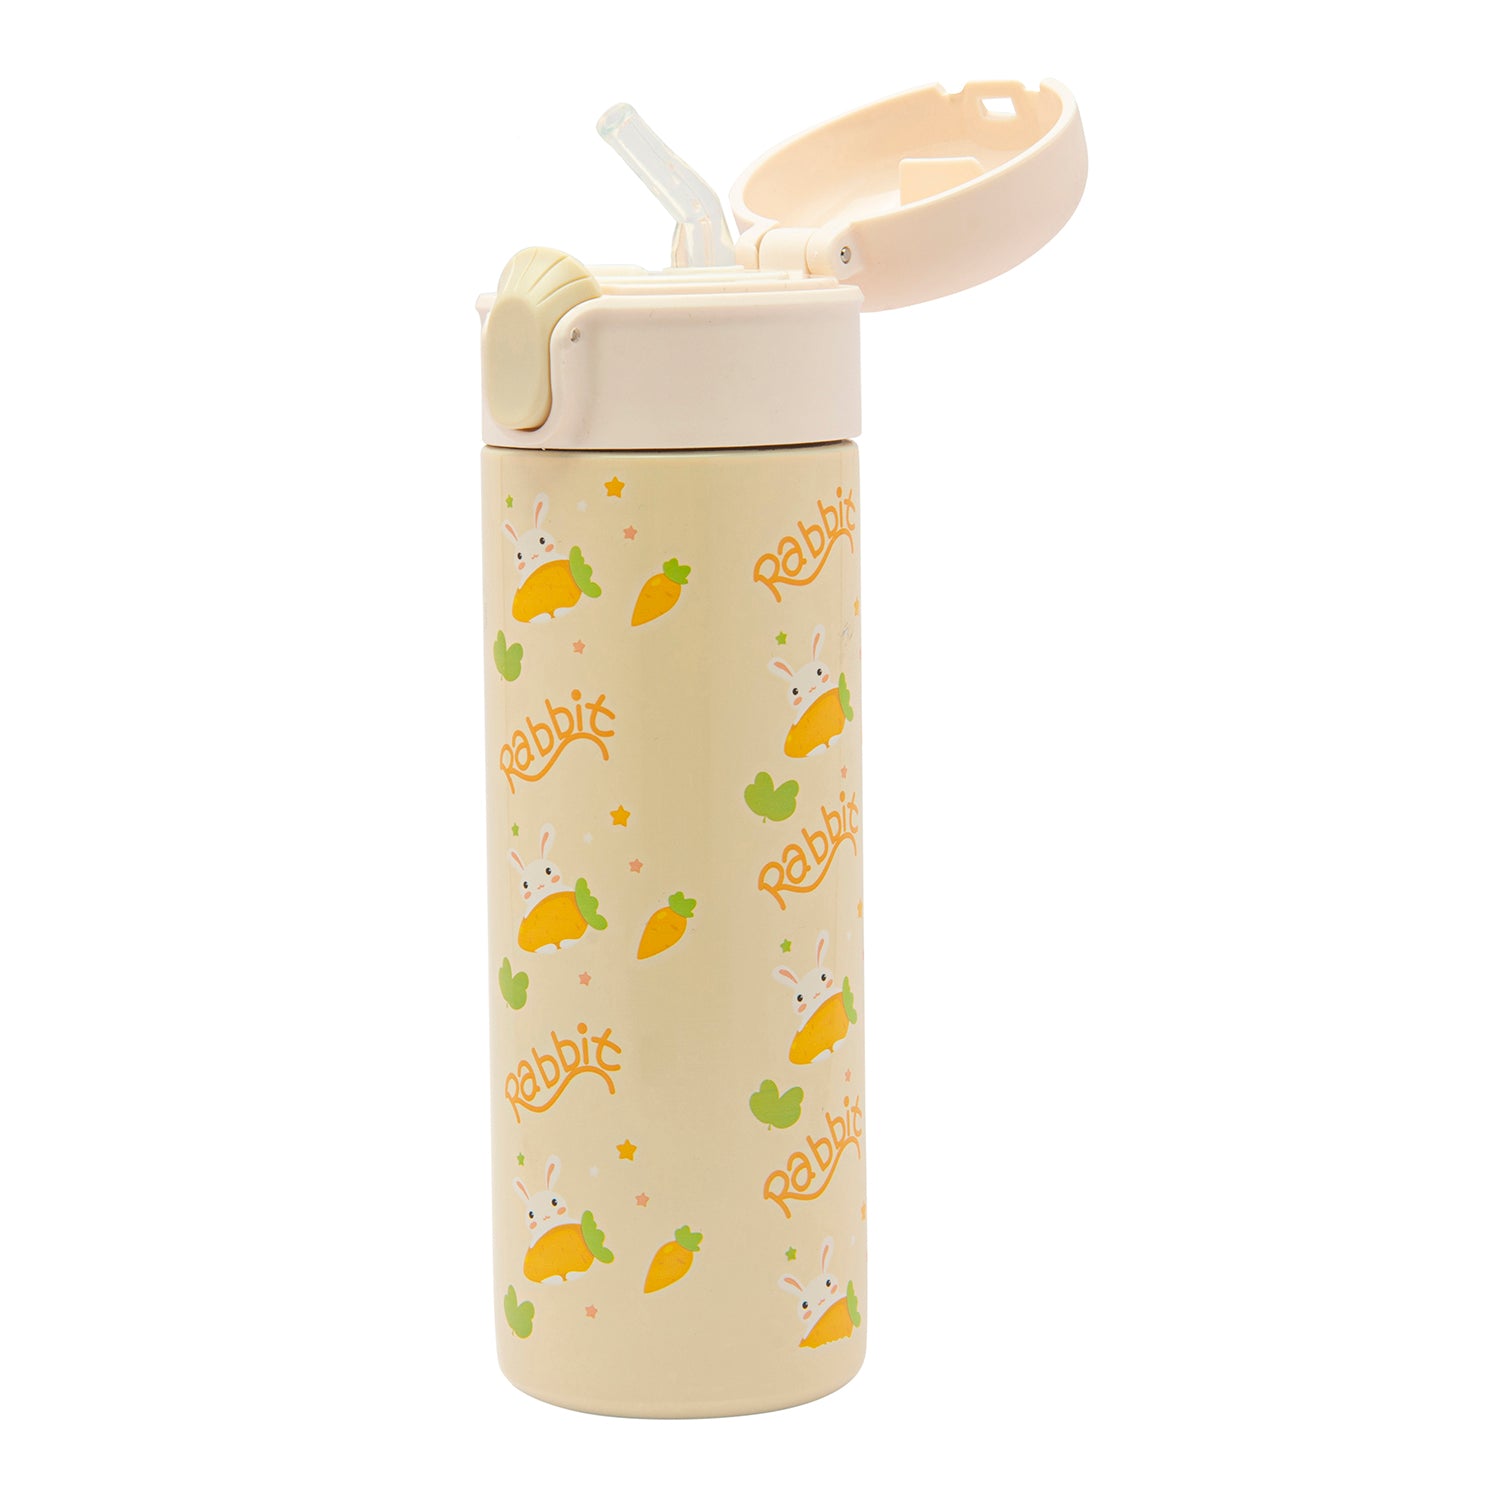 Rabbits Eat Carrots Offwhite 400 ml Stainless Steel Flask - Baby Moo